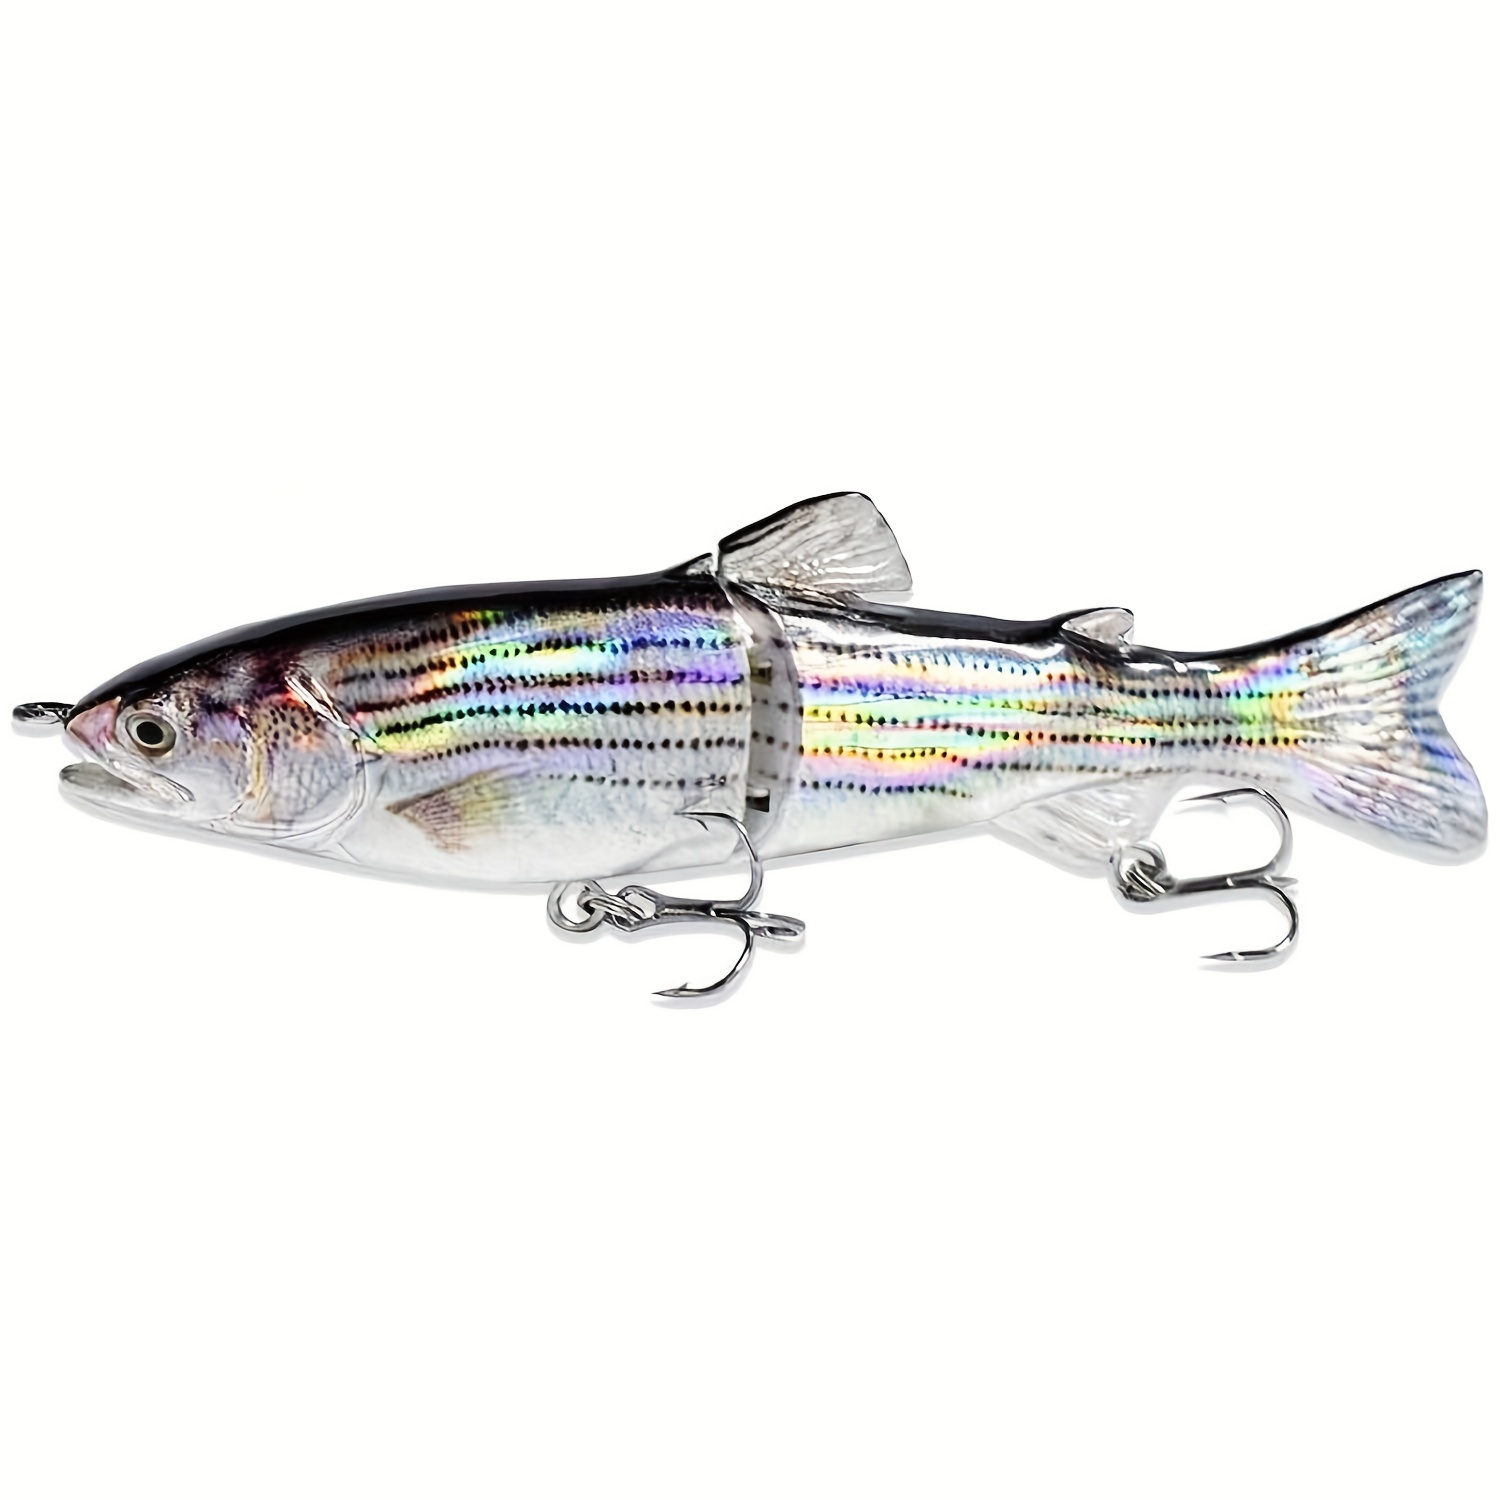 Buy Adium Fishing Lure Bait, Fishing Gear Fishing Equipment Hard Lure Bait  Set Fishing Tackle Artificial Lure Bait for Fisherman for River Pond  Saltwater Freshwater Online at Low Prices in India 